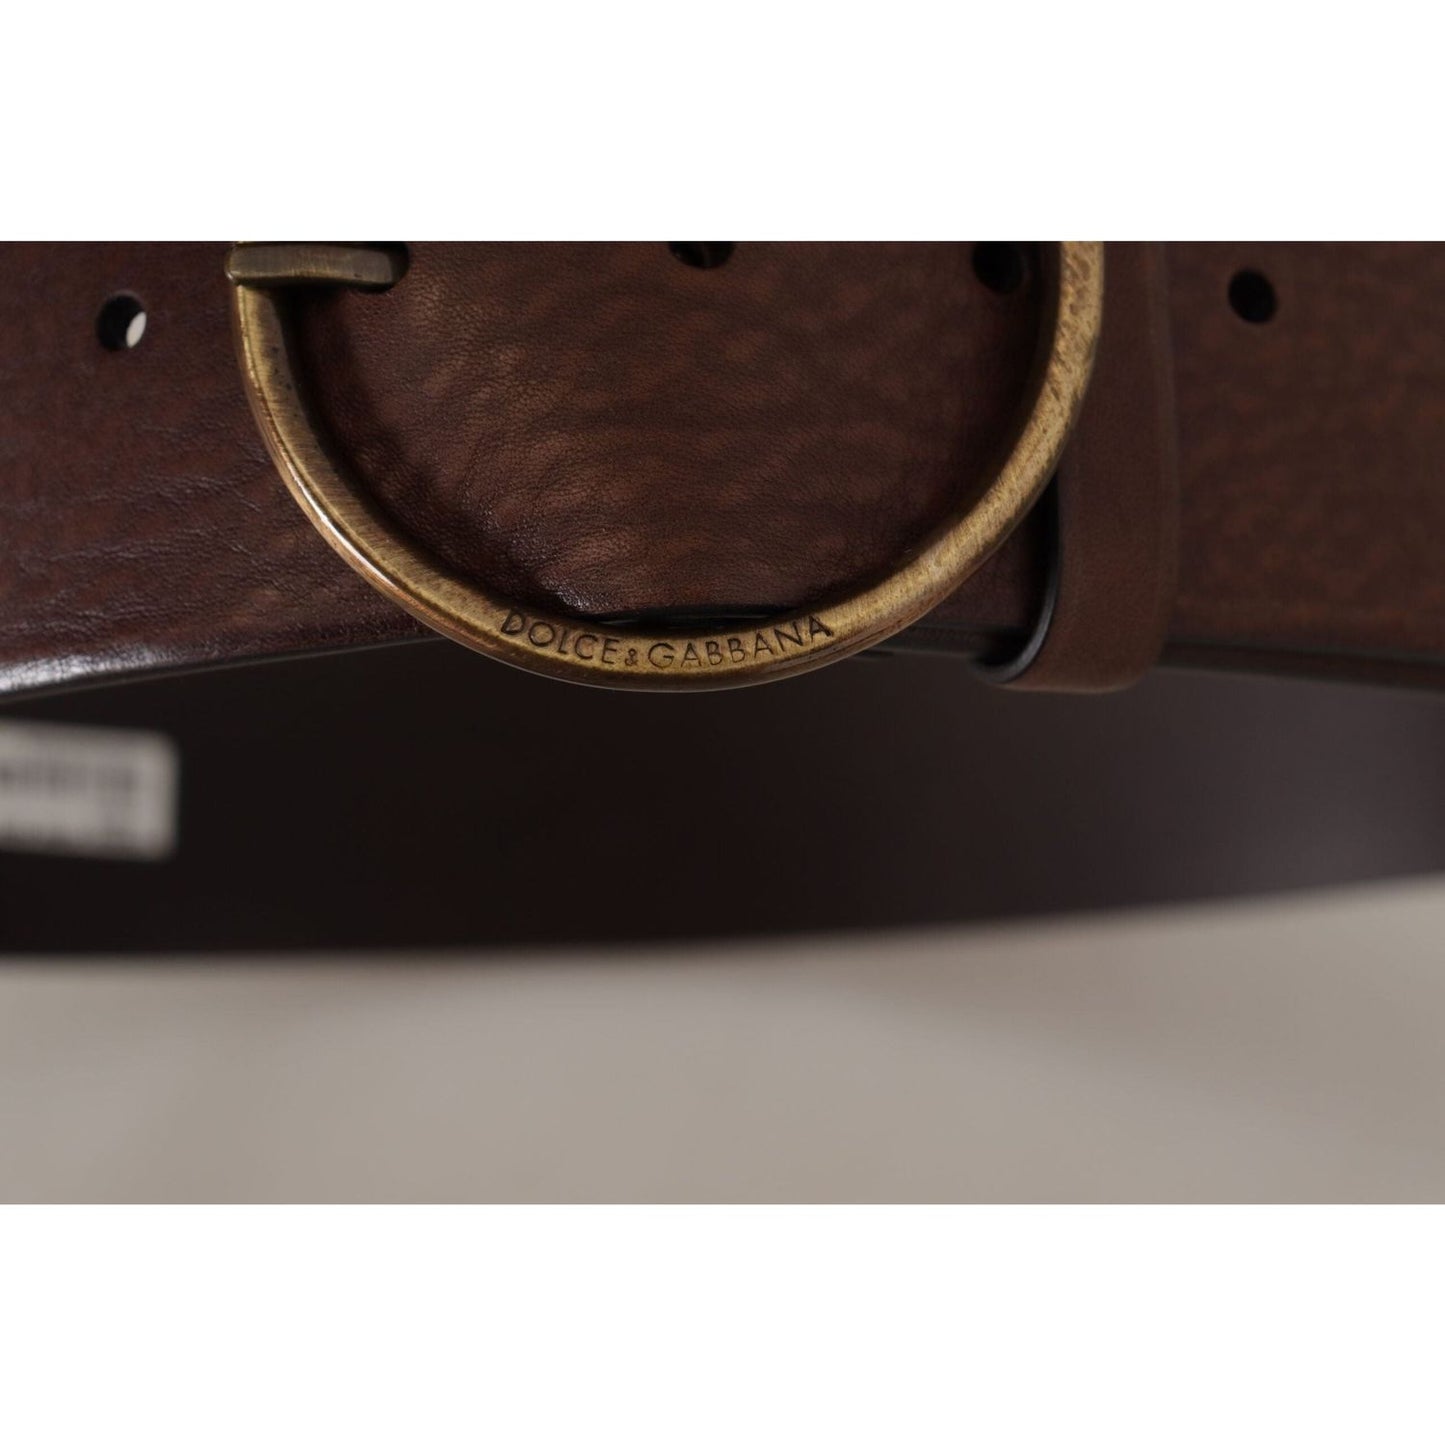 Dolce & Gabbana Elegant Brown Leather Belt with Engraved Buckle brown-leather-wide-waist-logo-metal-round-buckle-belt IMG_9746-1-scaled-c3f4136b-215.jpg